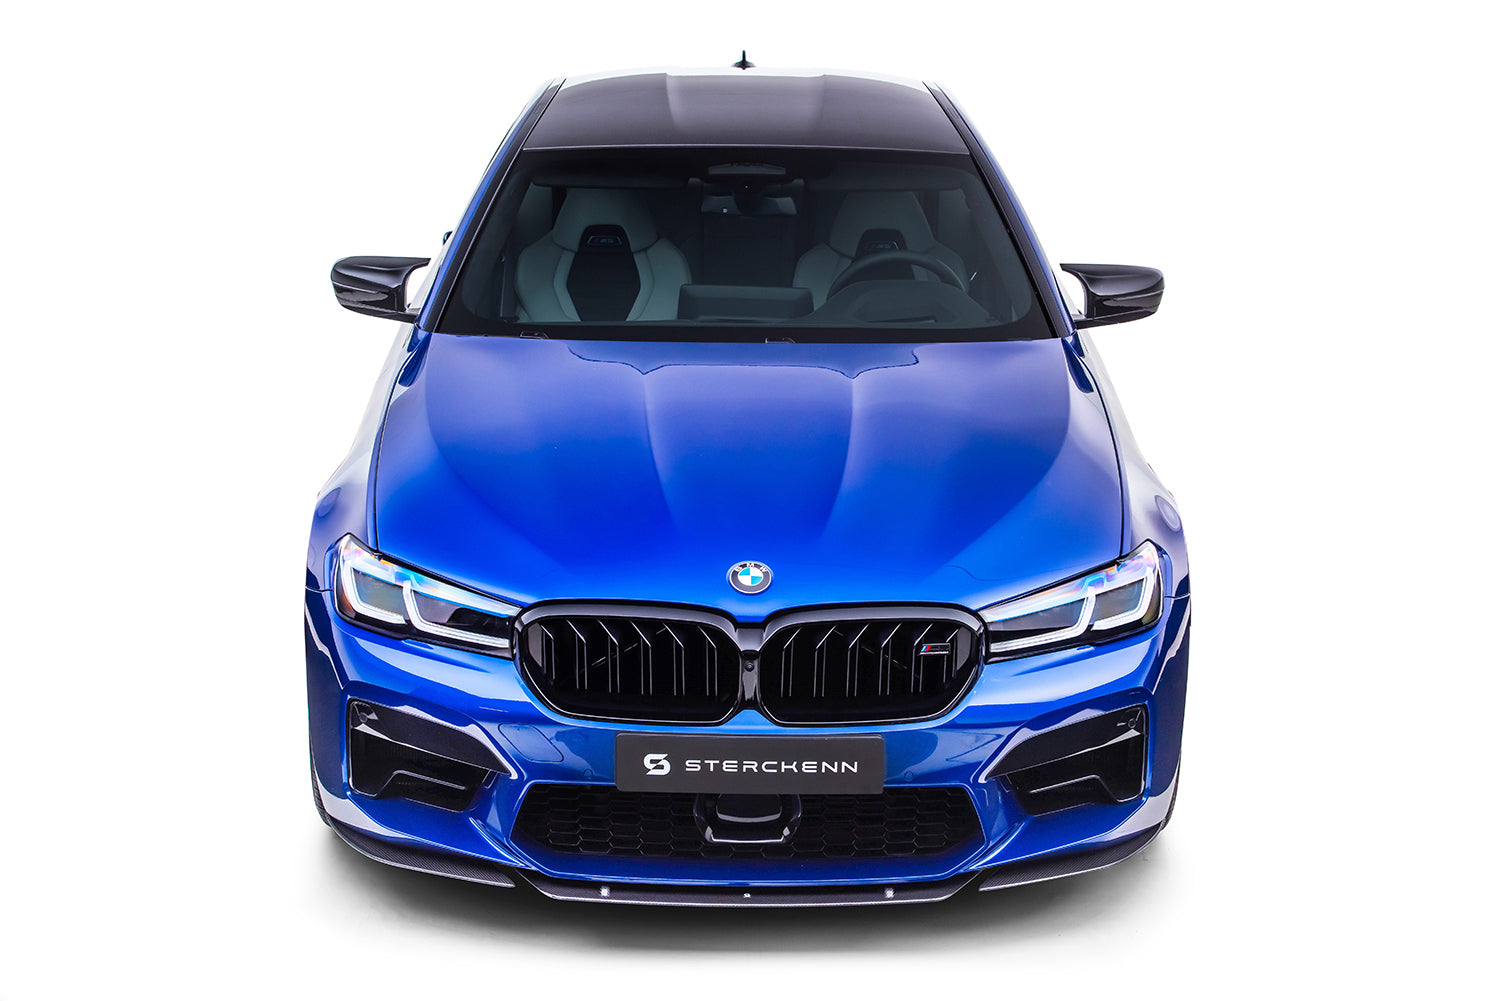 Front view of a blue BMW M5 (F90) LCI on a white background